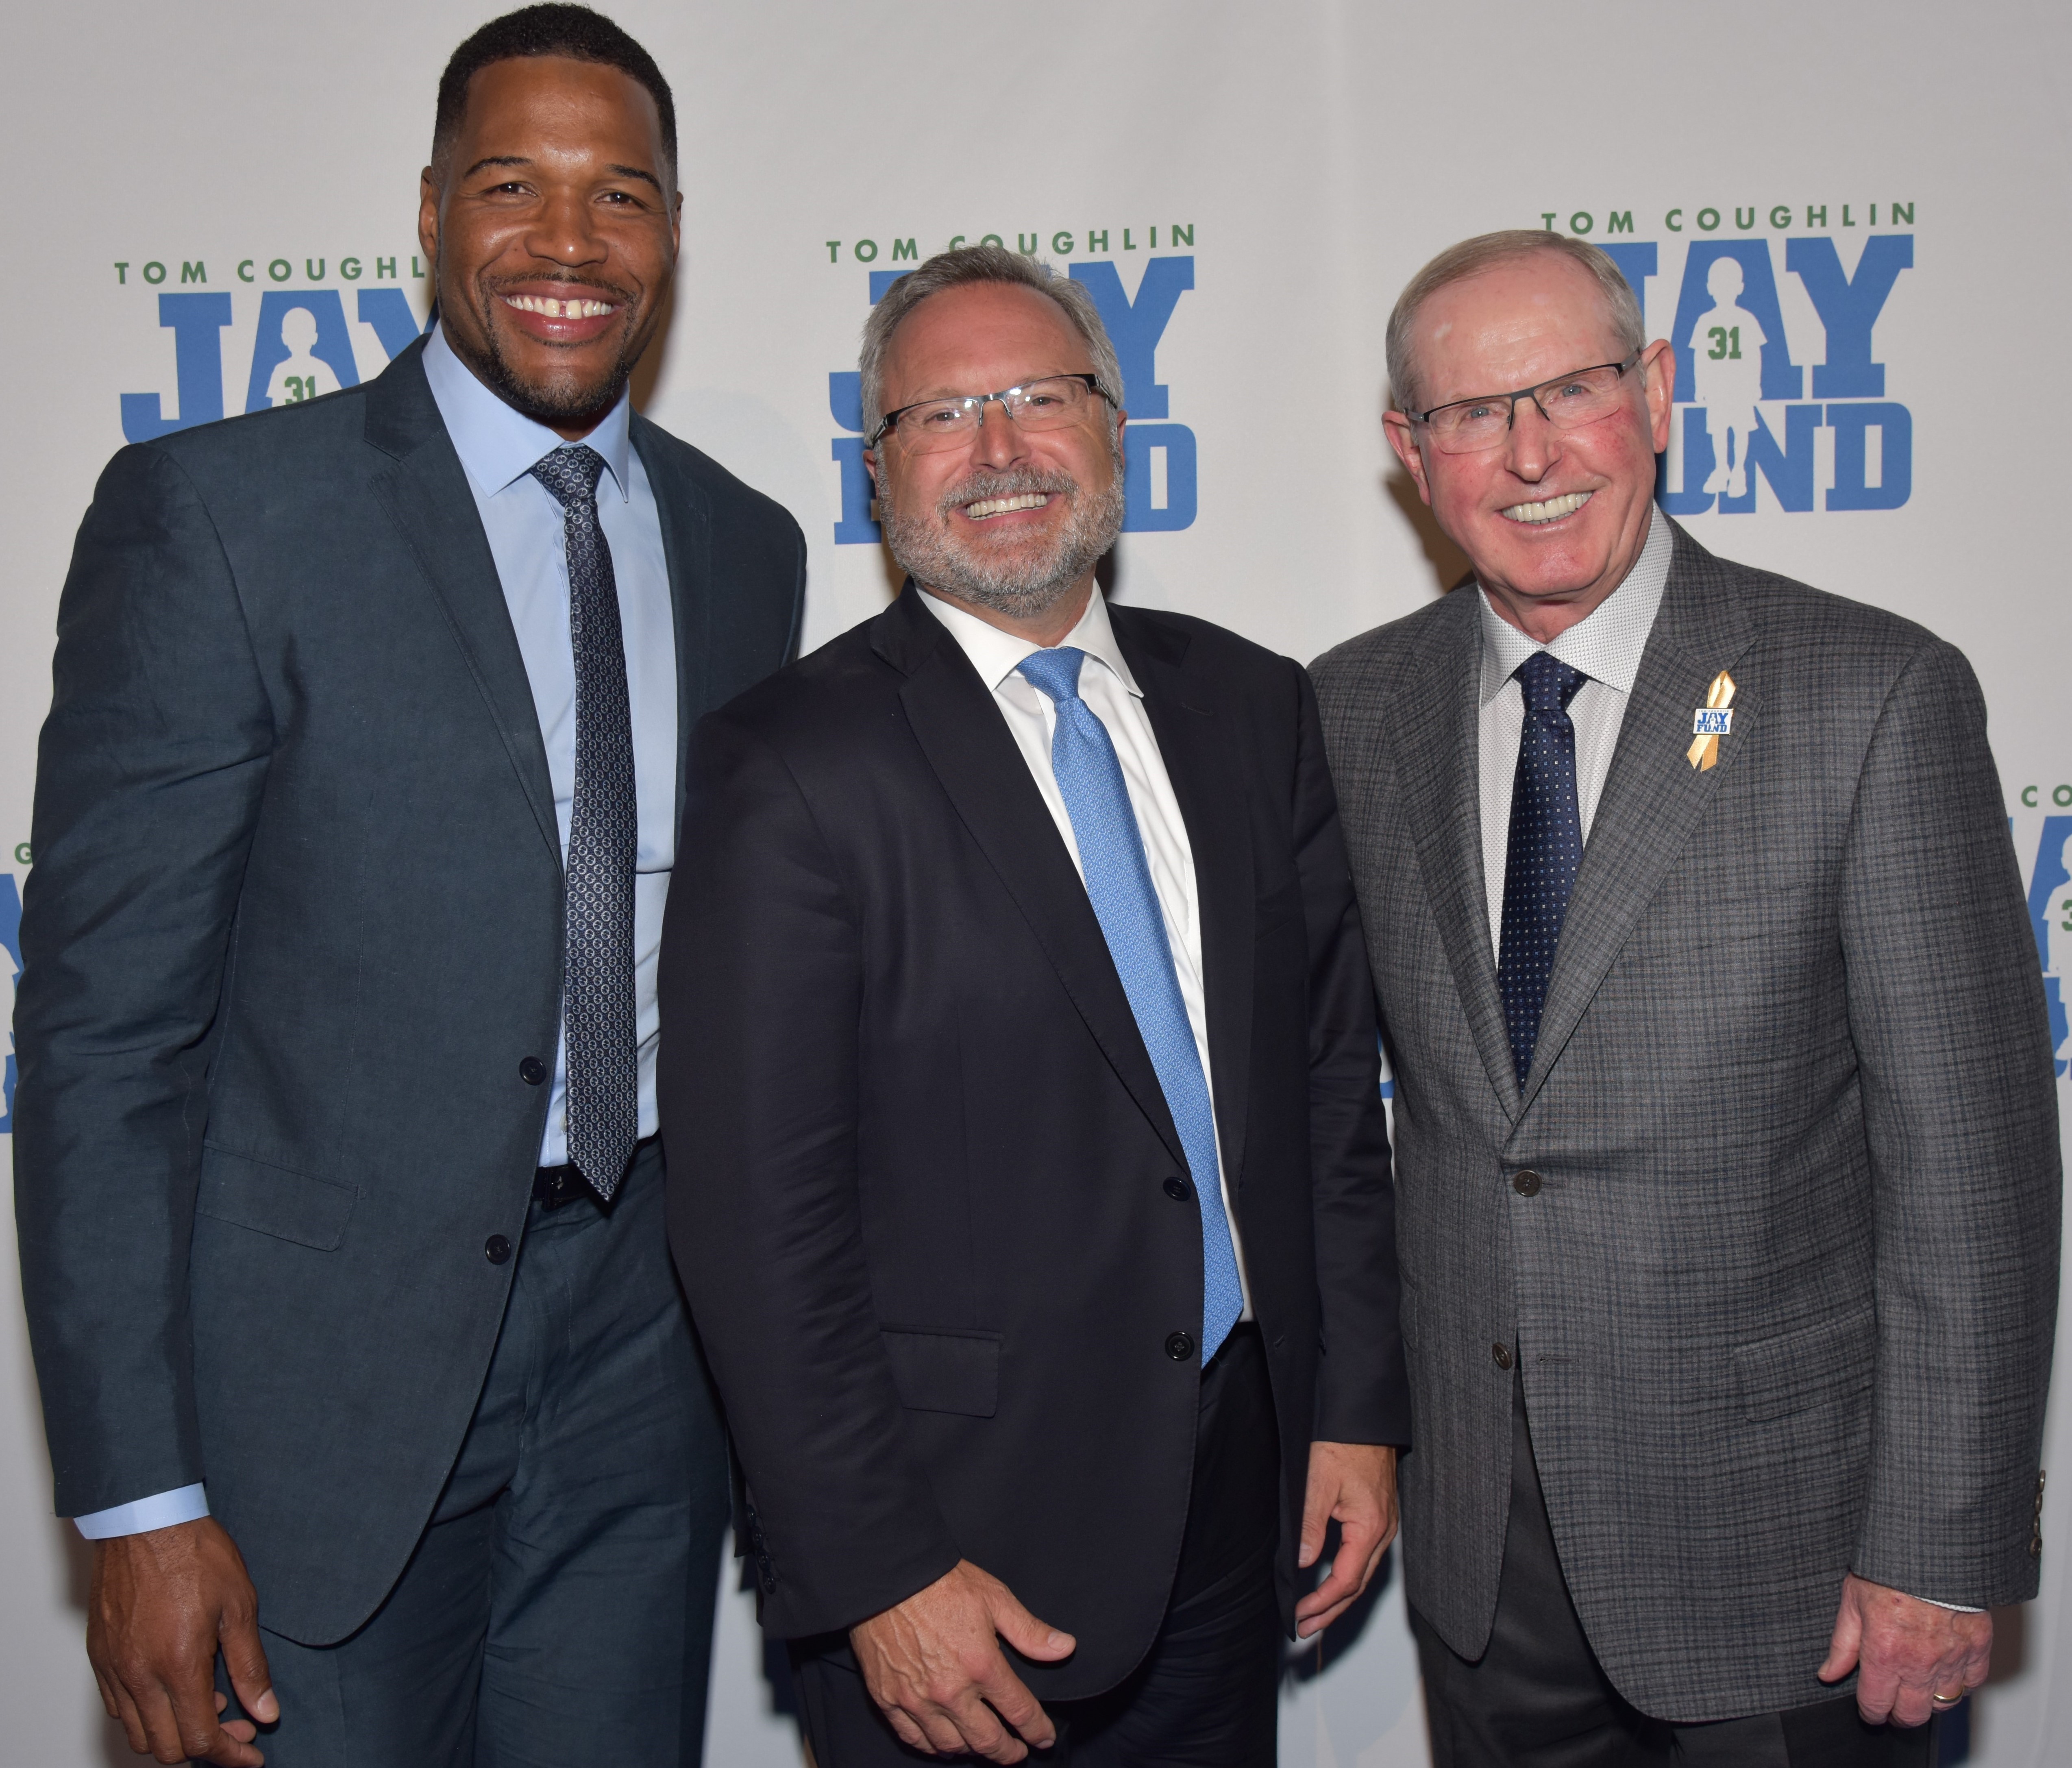 Michael Strahan, Steve Barry, and Tom Coughlin at the Tom Coughlin Jay Fund Foundation's annual Champions for Children Gala in NYC.